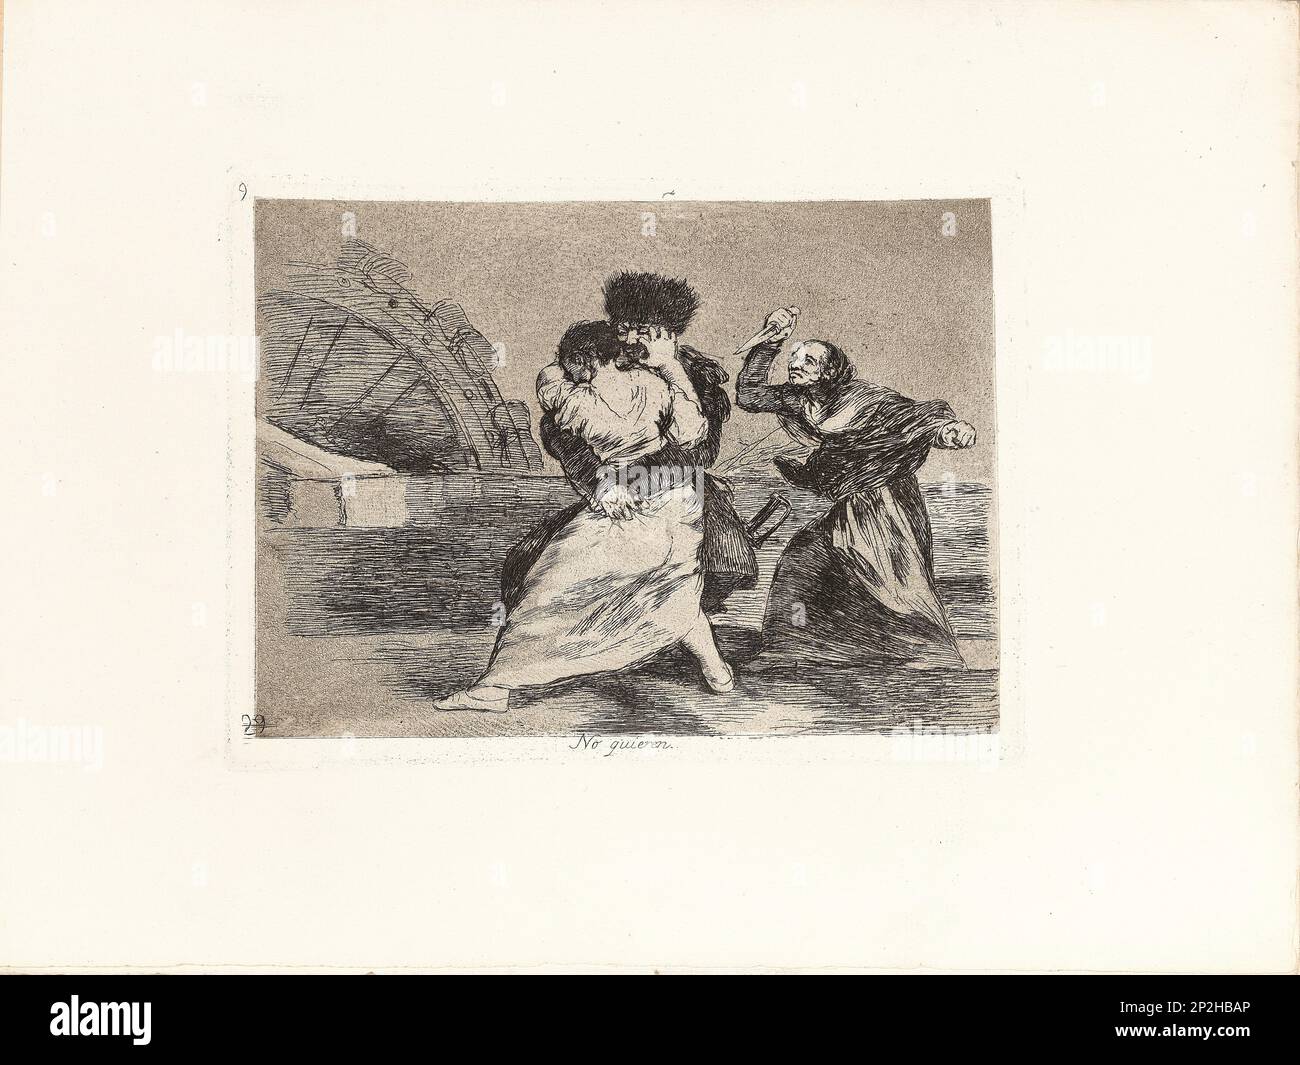 Los Desastres de la Guerra (The Disasters of War), Plate 9: No quieren (They do not want to), 1810s. Private Collection. Stock Photo